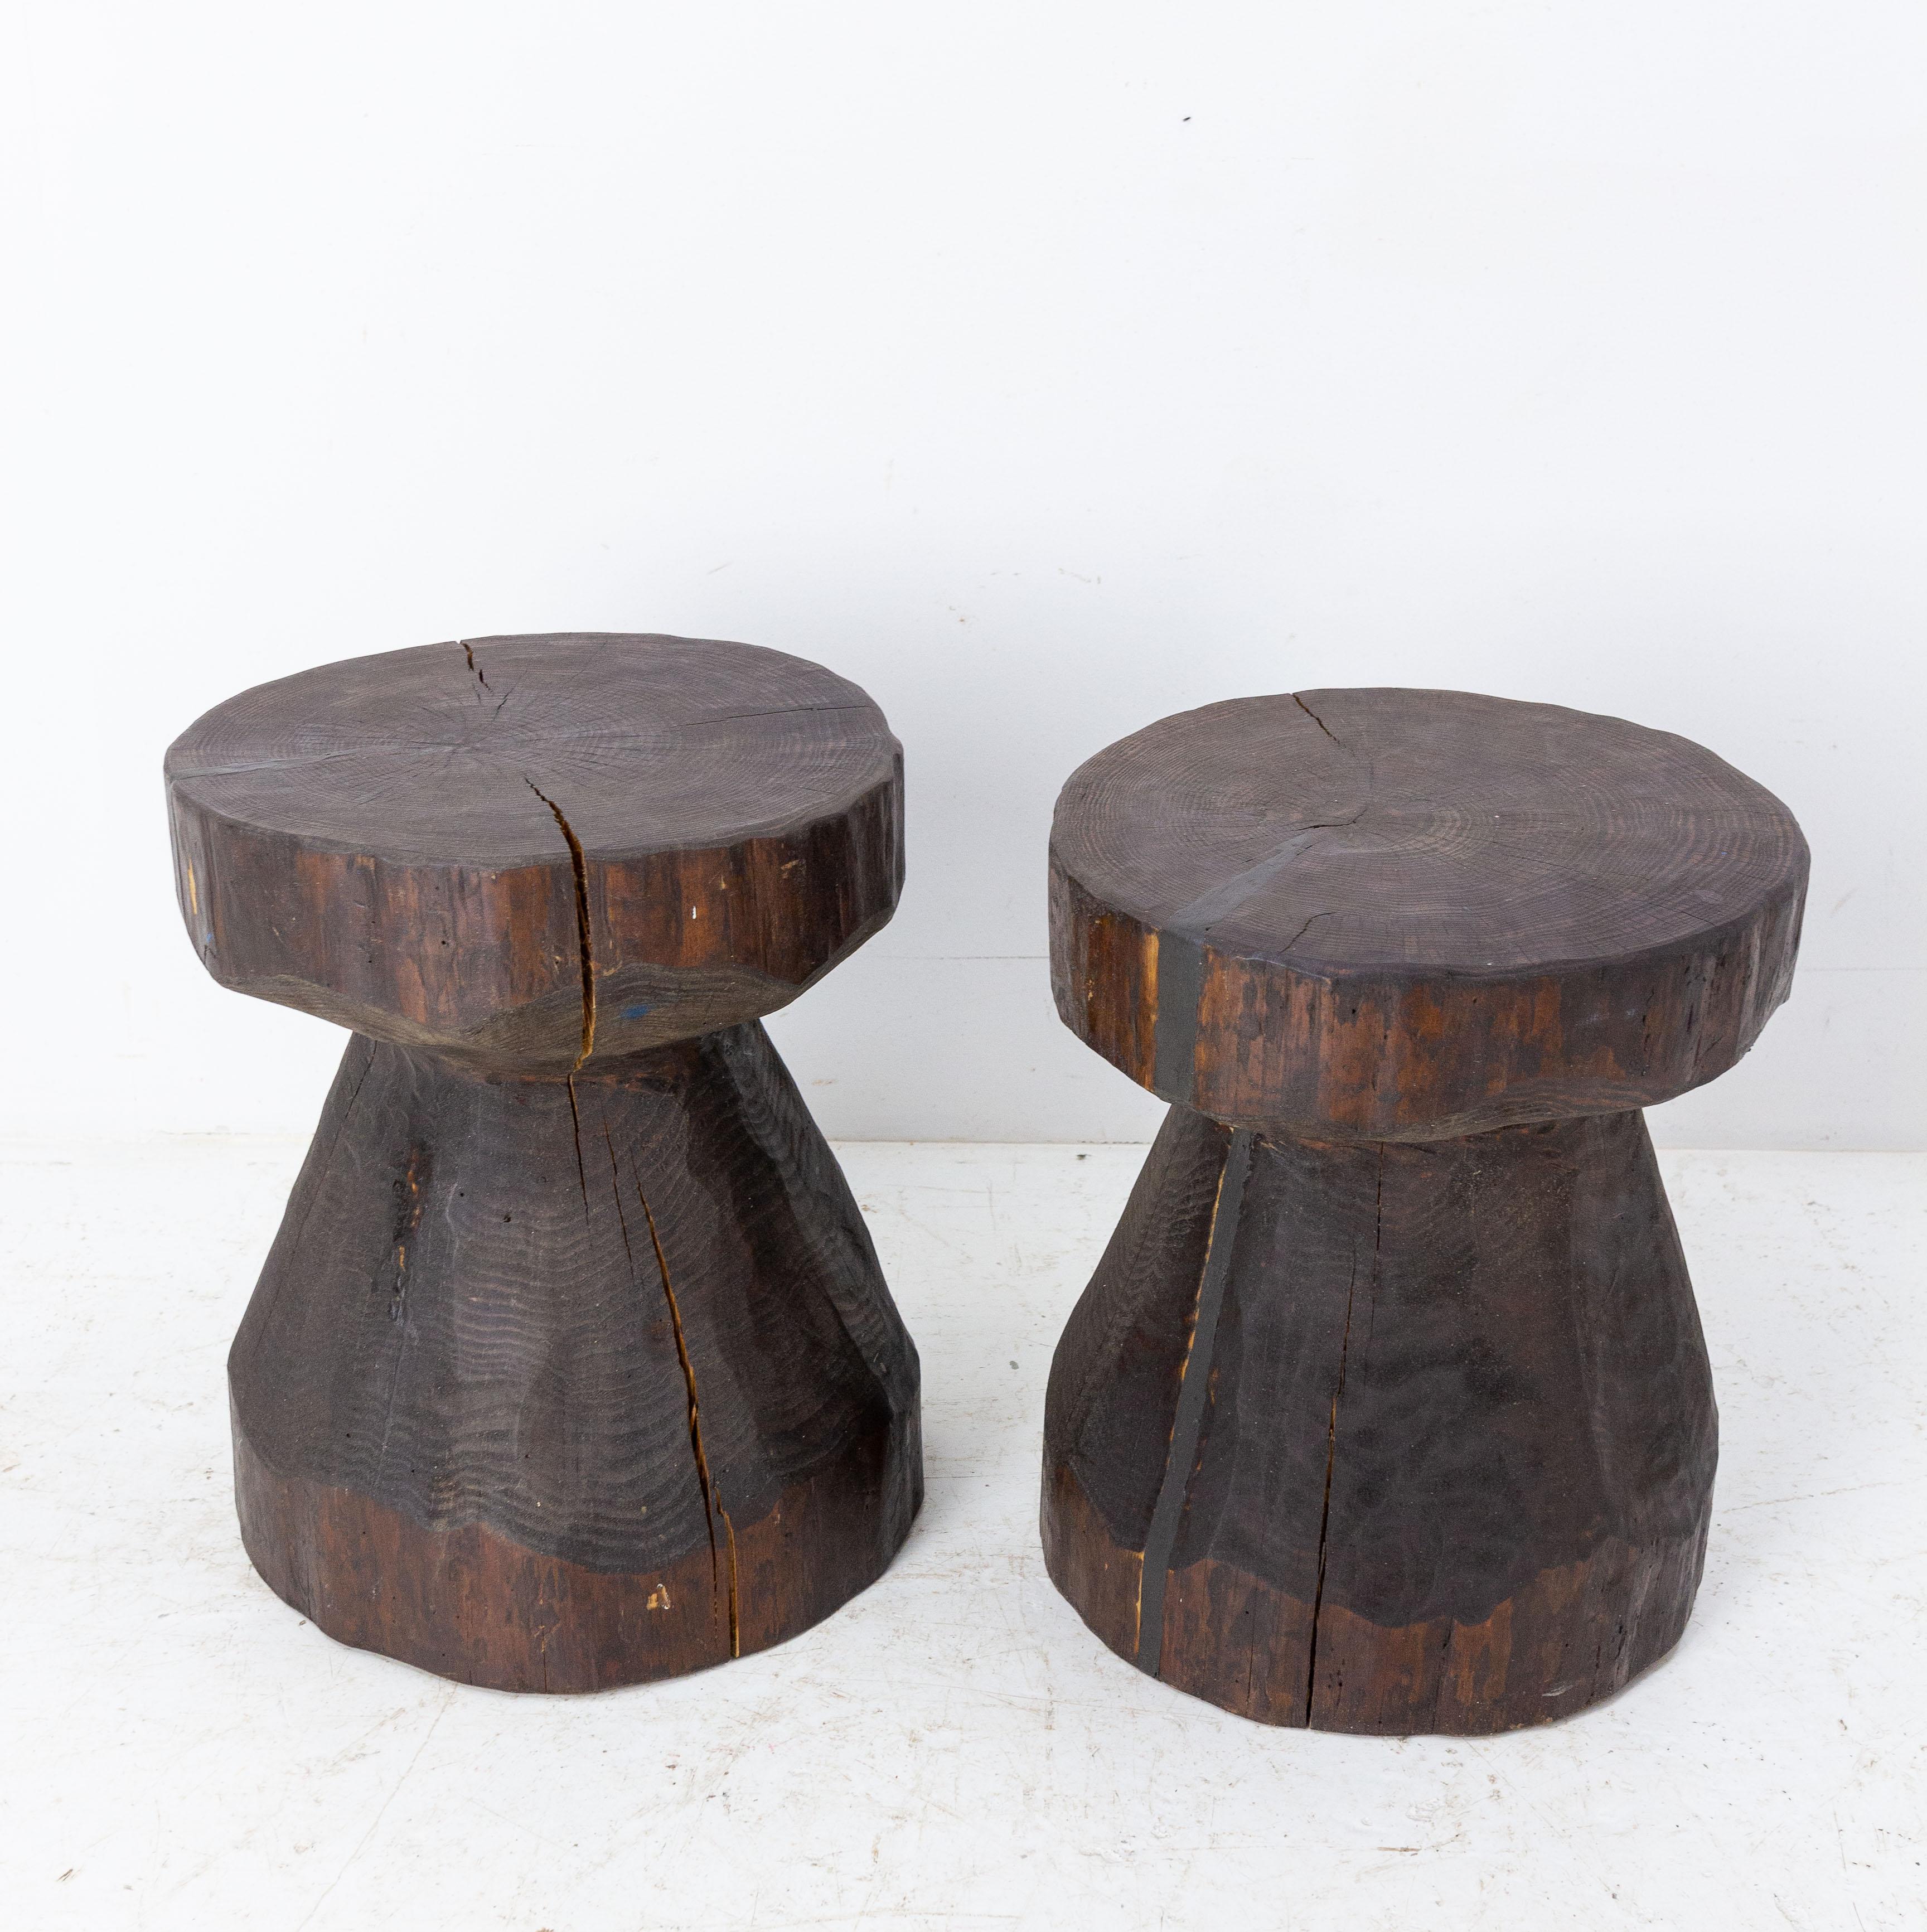 Pair of brutalist stools carved in the South-West of France (South of Bordeaux)
The wood comes from the Martin tempest which changed the forest landscape for several years in the south of France.
The two stools have the same diameter: 12.60 in. (32